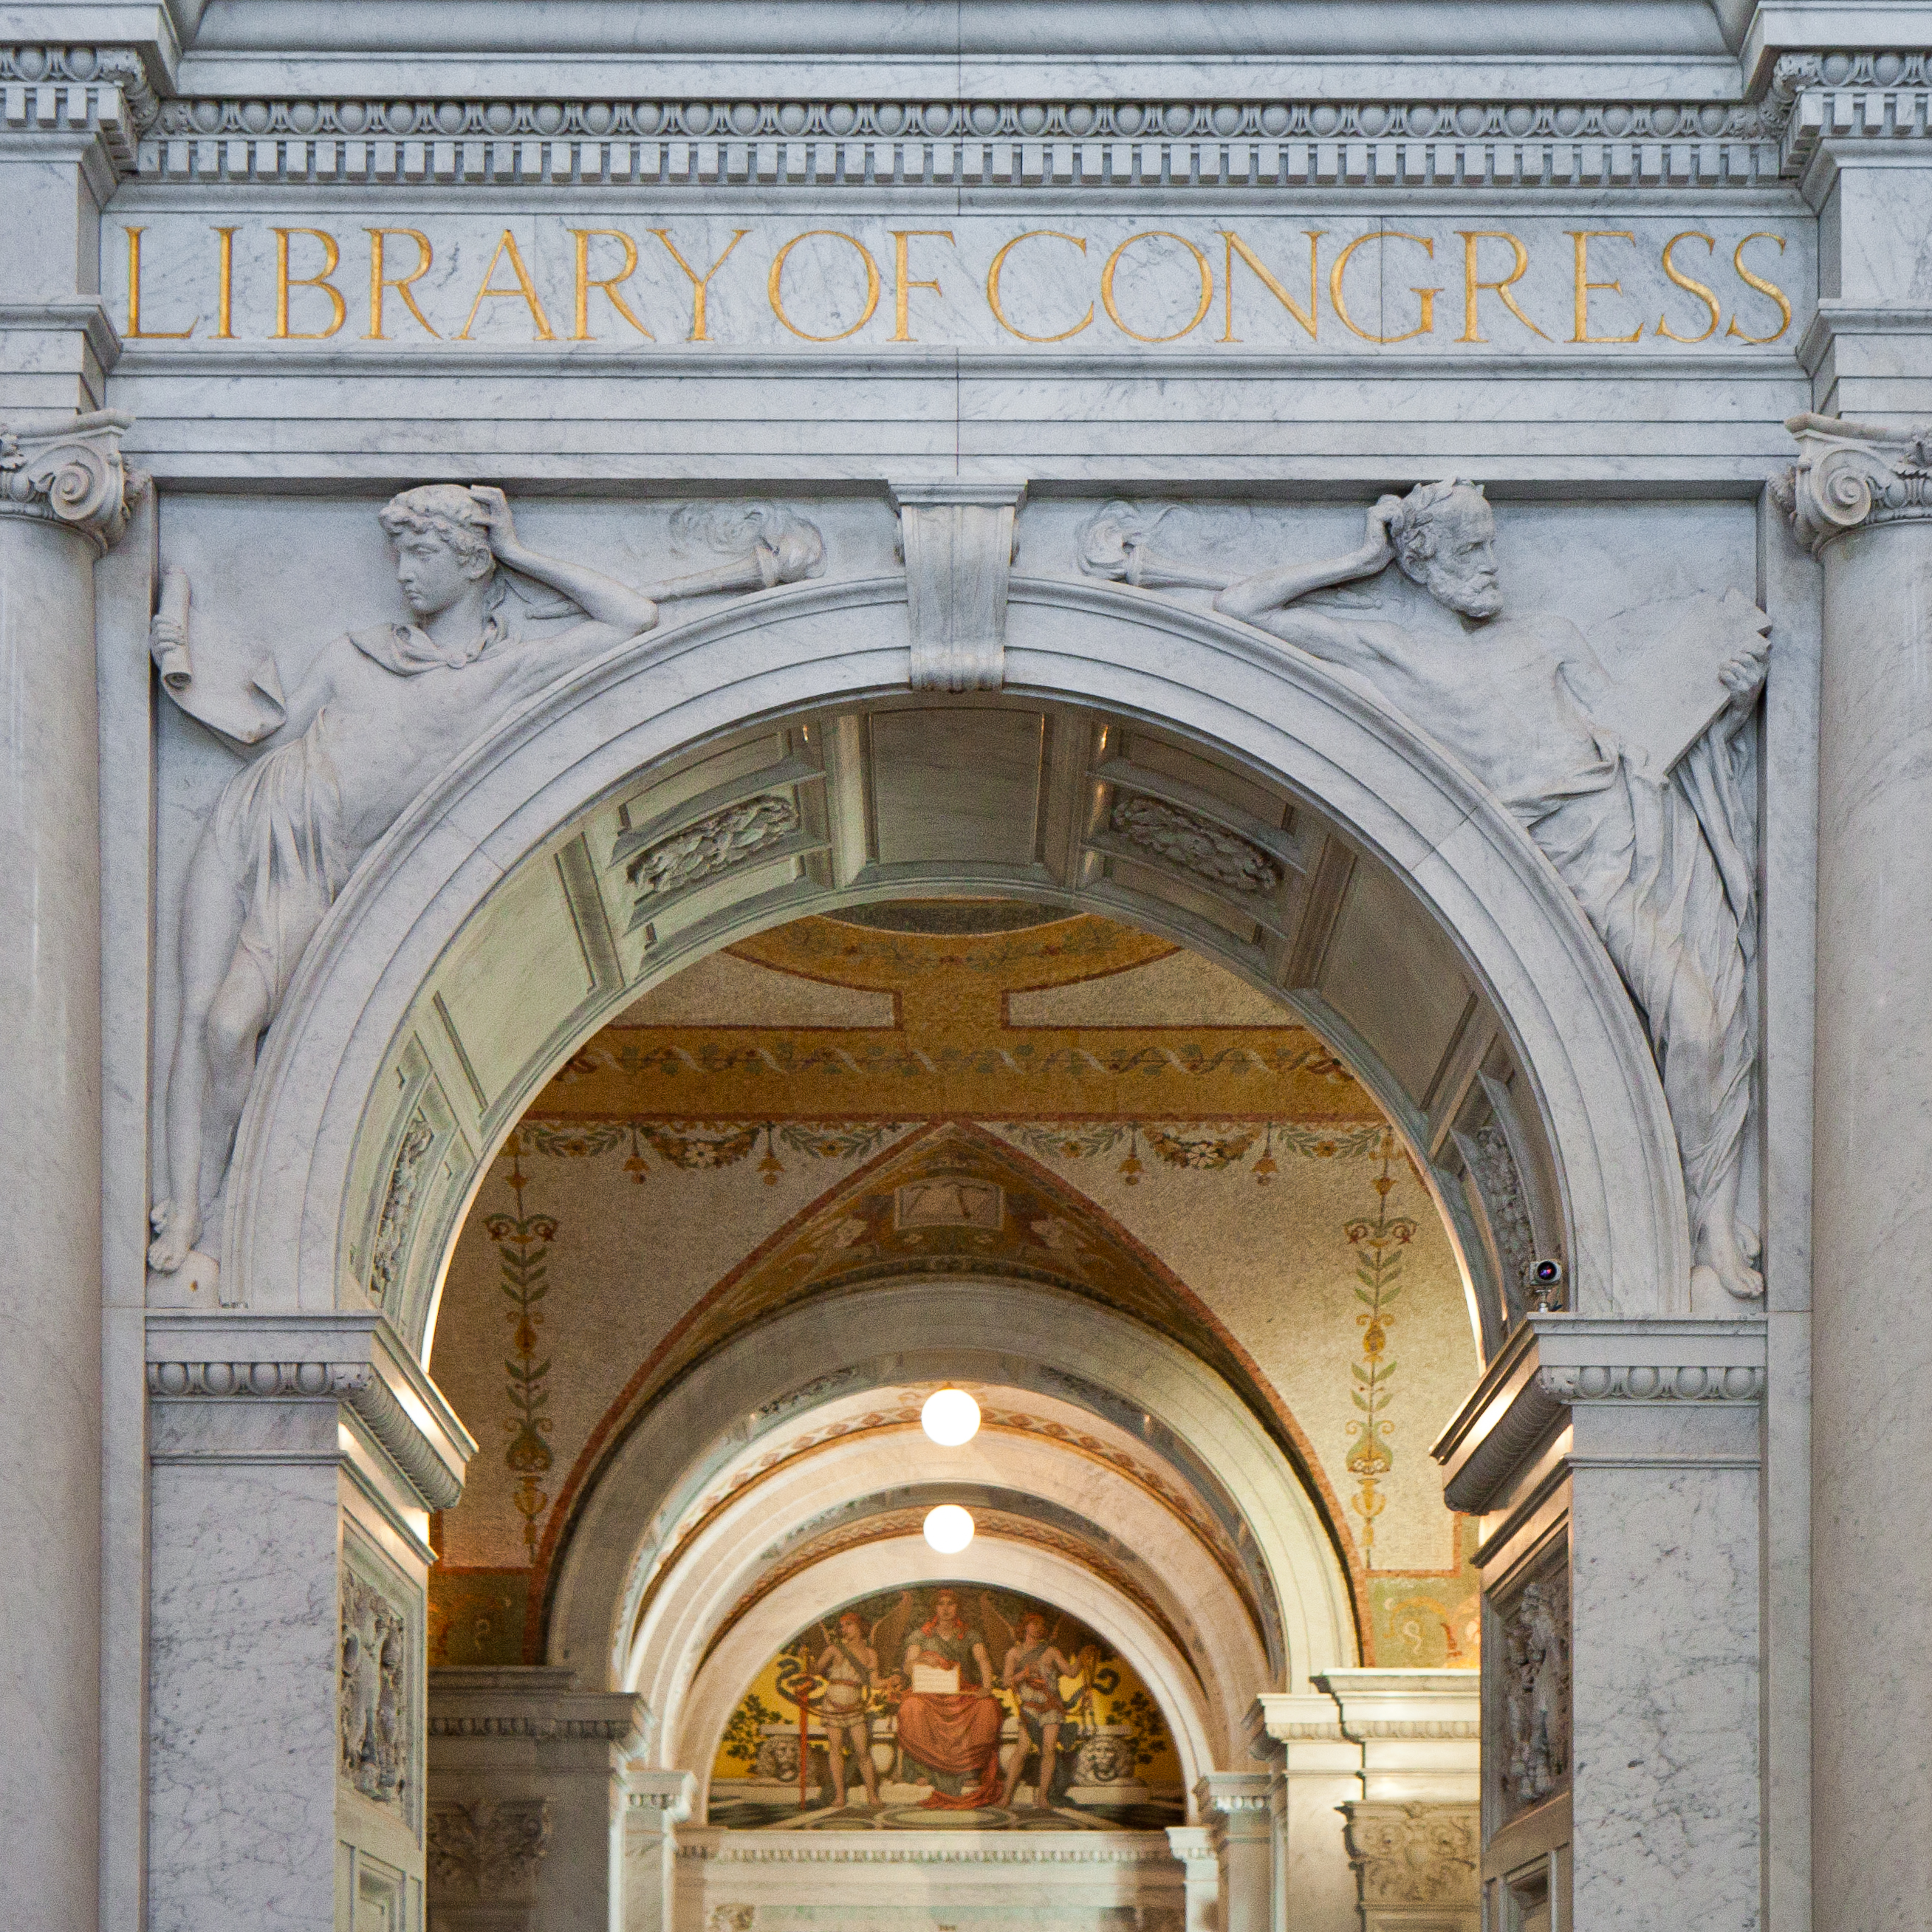  A gray marble arch leading from the Great Hall to the Reading Room at the Library of Congress. In marble on either side of the arch are carvings of two men. On the left is a young student looking at a scroll, on the right is an older man with a beard looking at a stone tablet. Above the arch are the words “Library of Congress.” inscribed in gold.